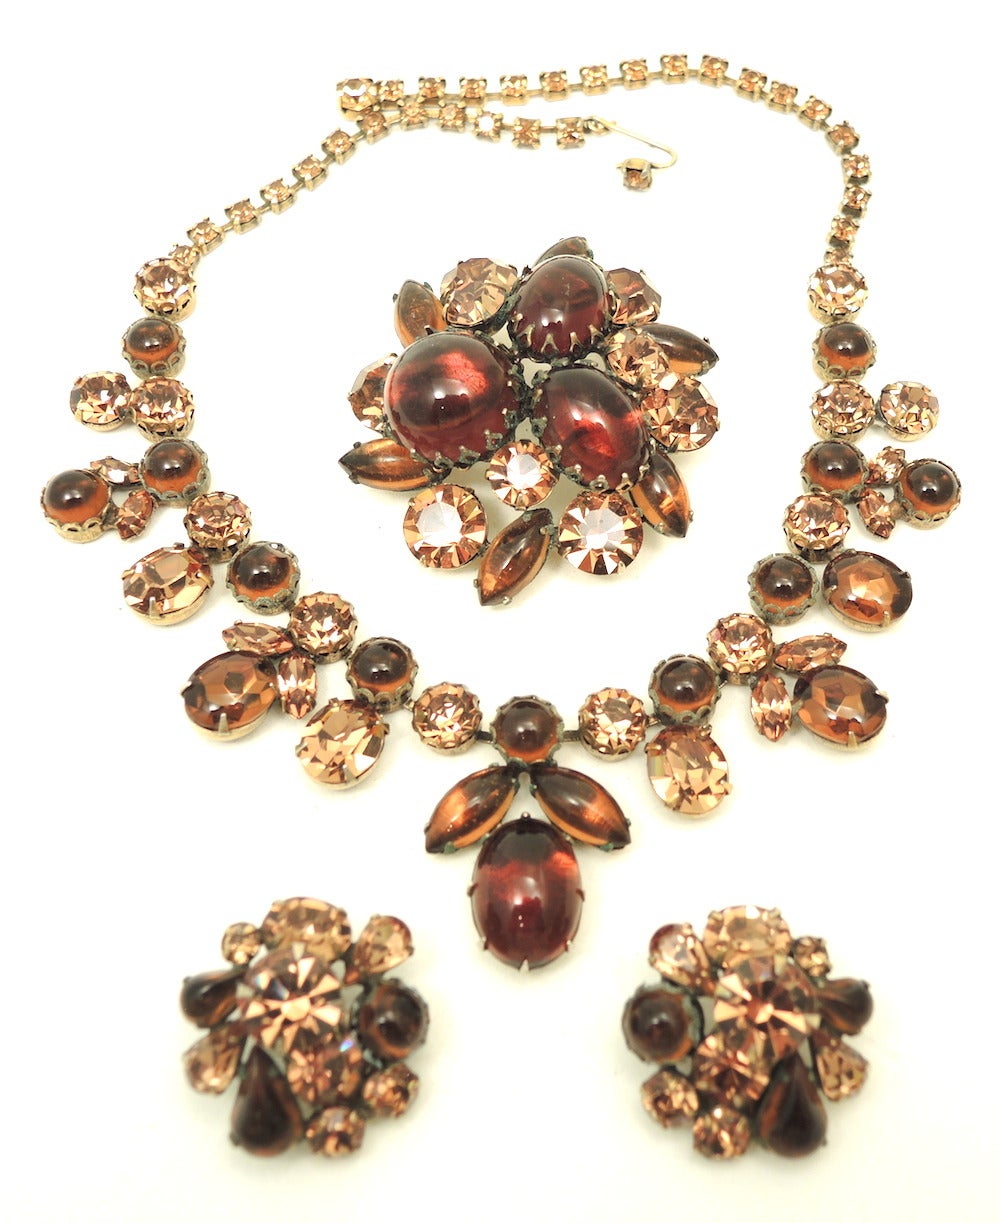 This parure, is beautifully made and has a very expensive to it.  It is a vintage unsigned Schreiner set that features topaz color rhinestones in a gold-tone setting.  The necklace measures 16” with a hook closure with a front drop of 1 ¼” top to